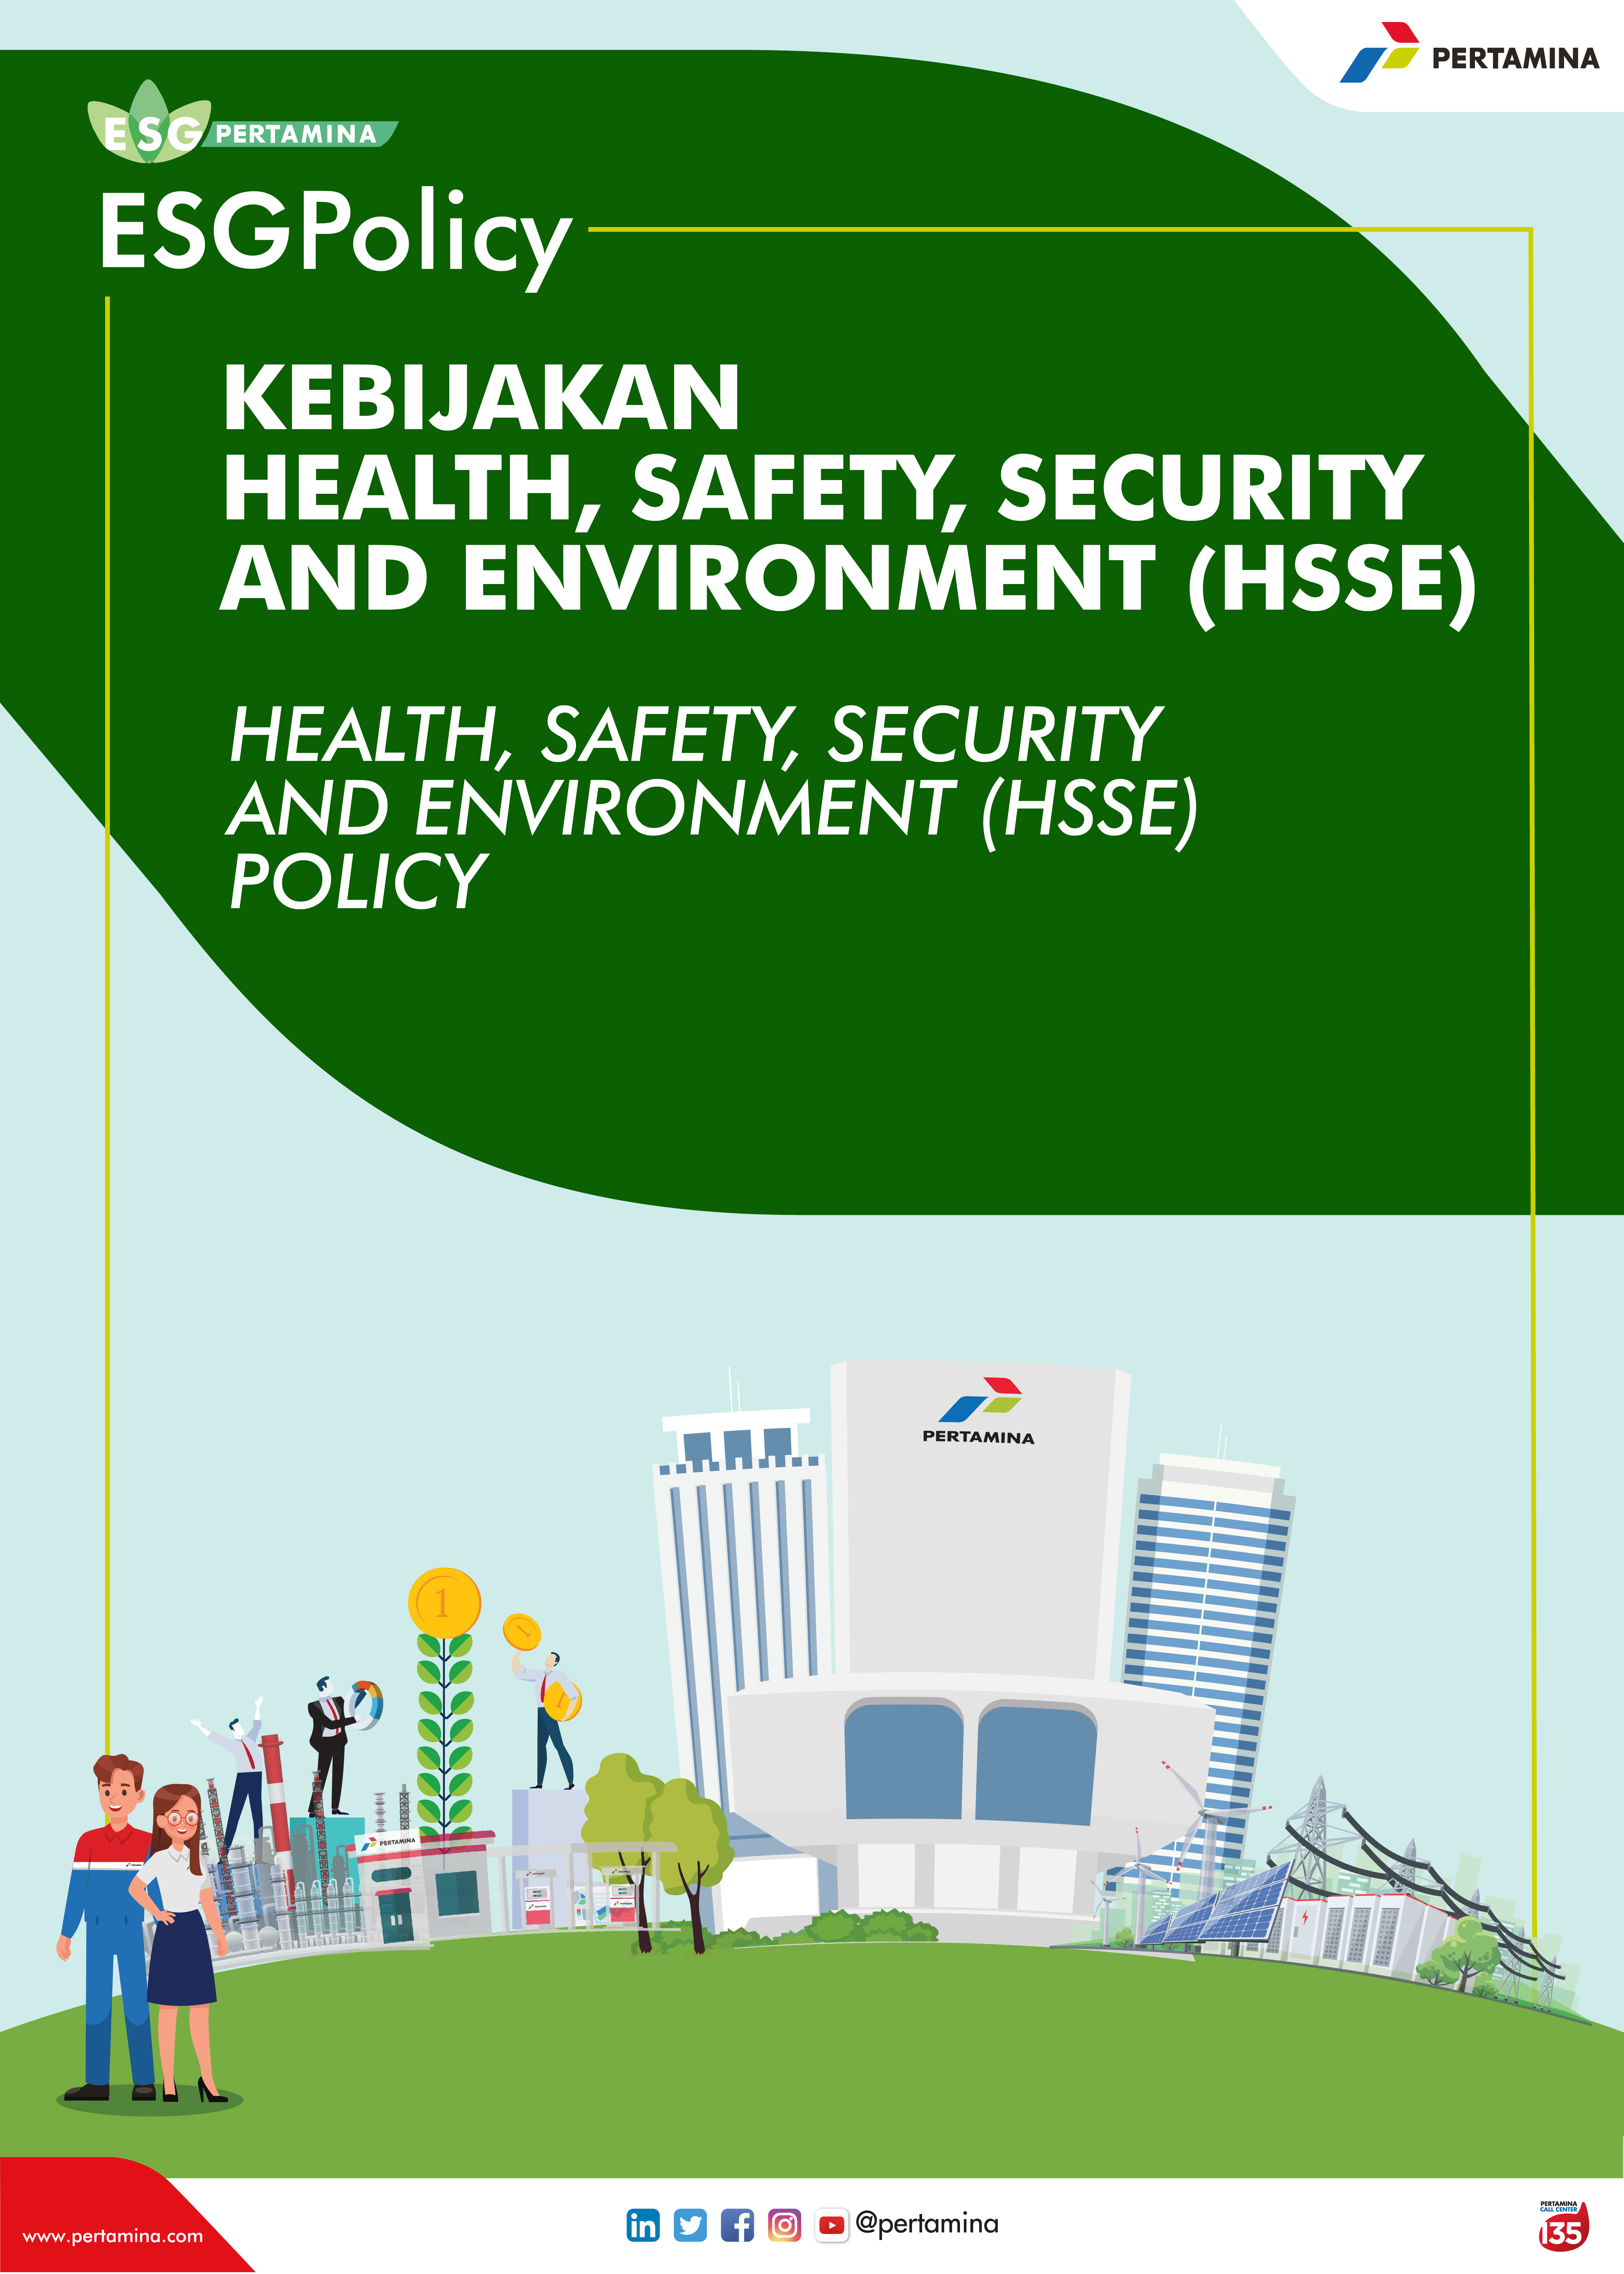 Health, Safety, Security and Environment (HSSE) Policy